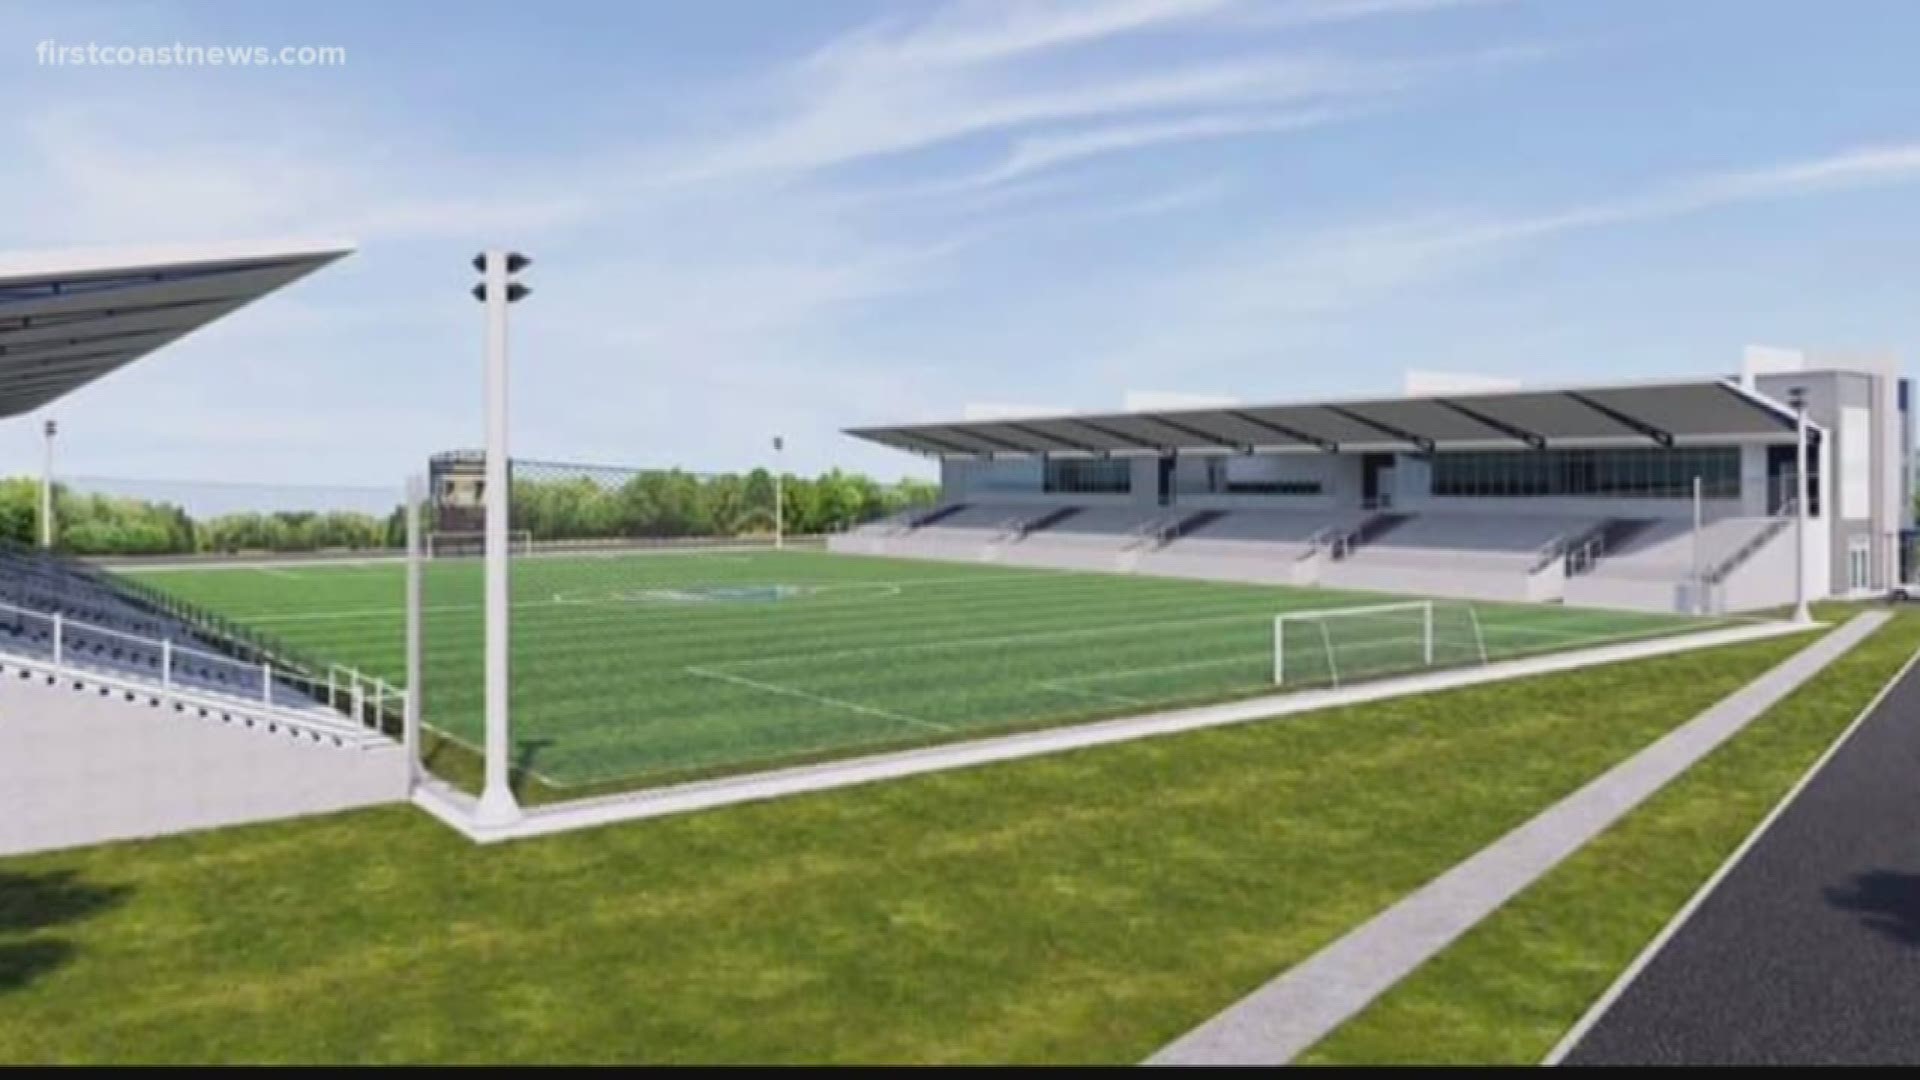 The Jacksonville City Council gave unanimous approval to the Jacksonville Armada soccer team's proposal for a new stadium near Downtown Jacksonville.